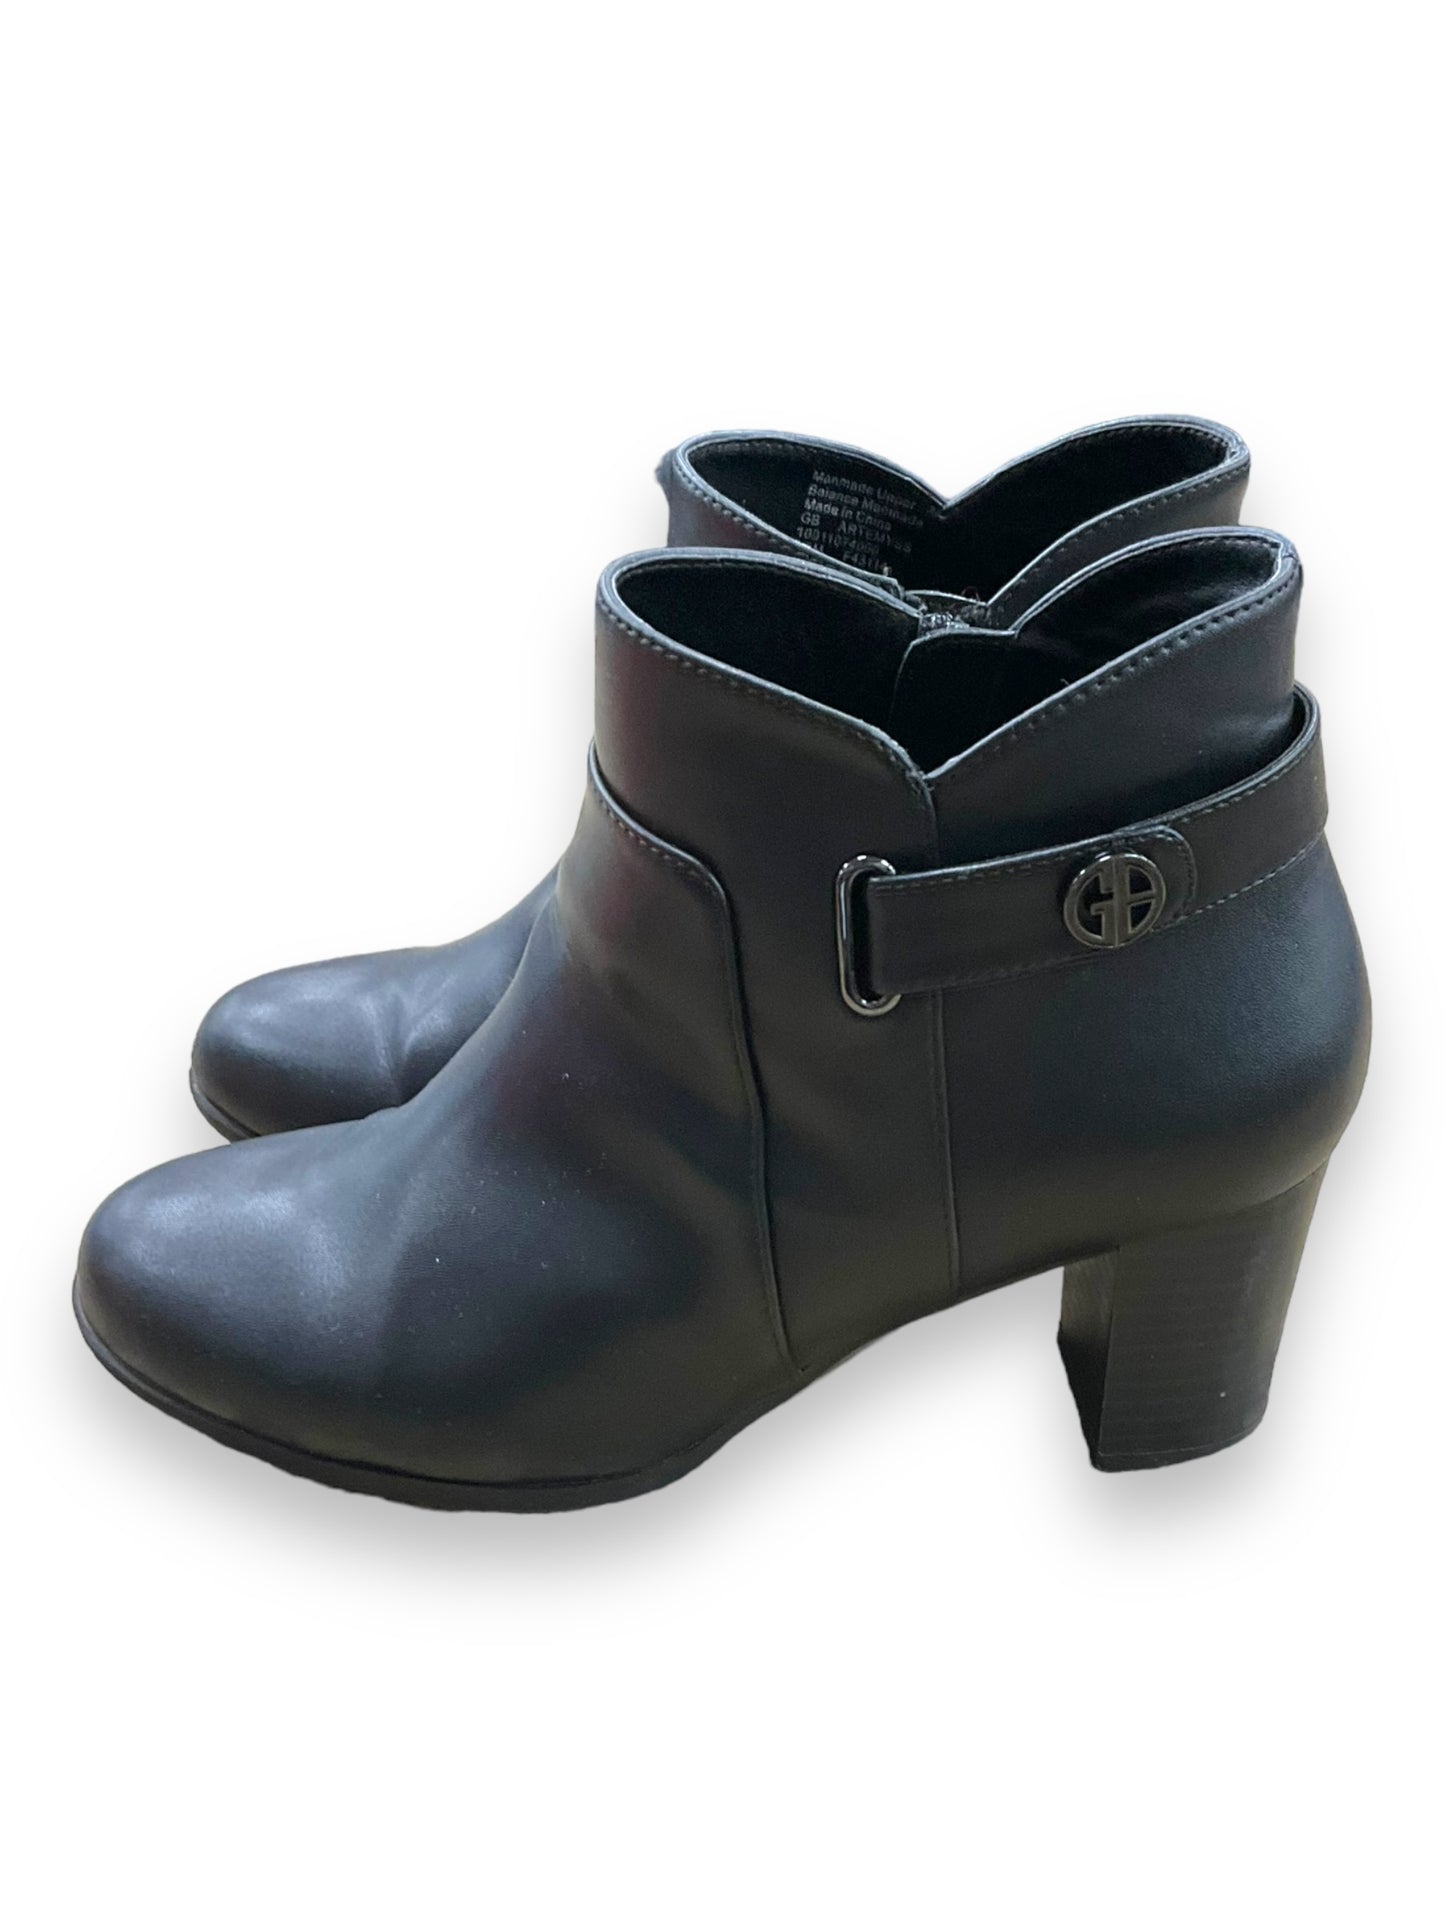 Boots Ankle Heels By Giani Bernini  Size: 8.5